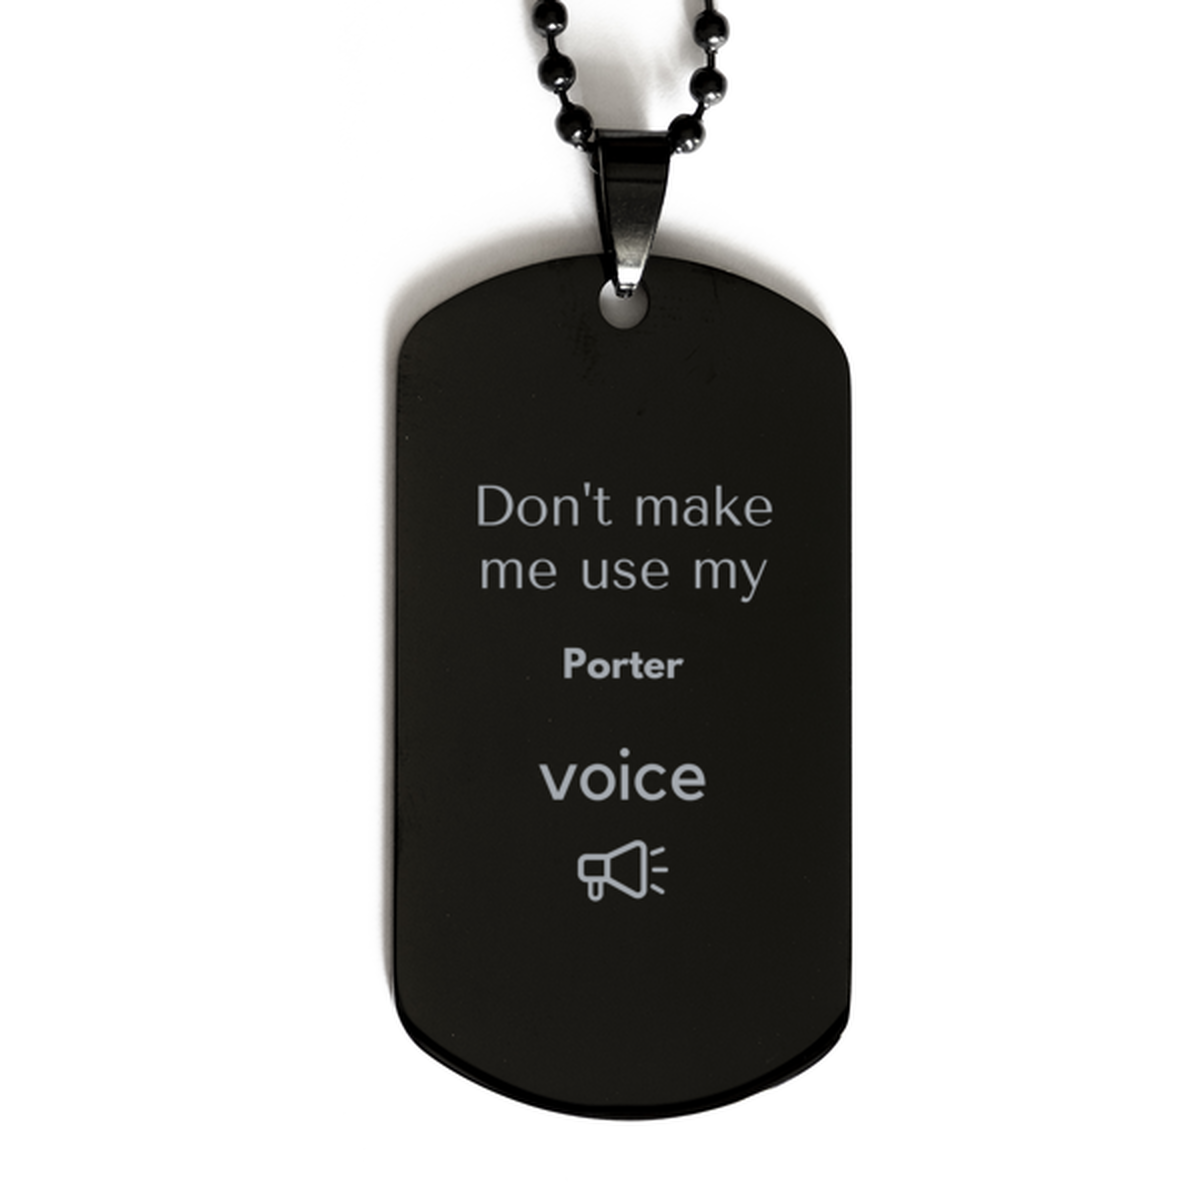 Don't make me use my Porter voice, Sarcasm Porter Gifts, Christmas Porter Black Dog Tag Birthday Unique Gifts For Porter Coworkers, Men, Women, Colleague, Friends